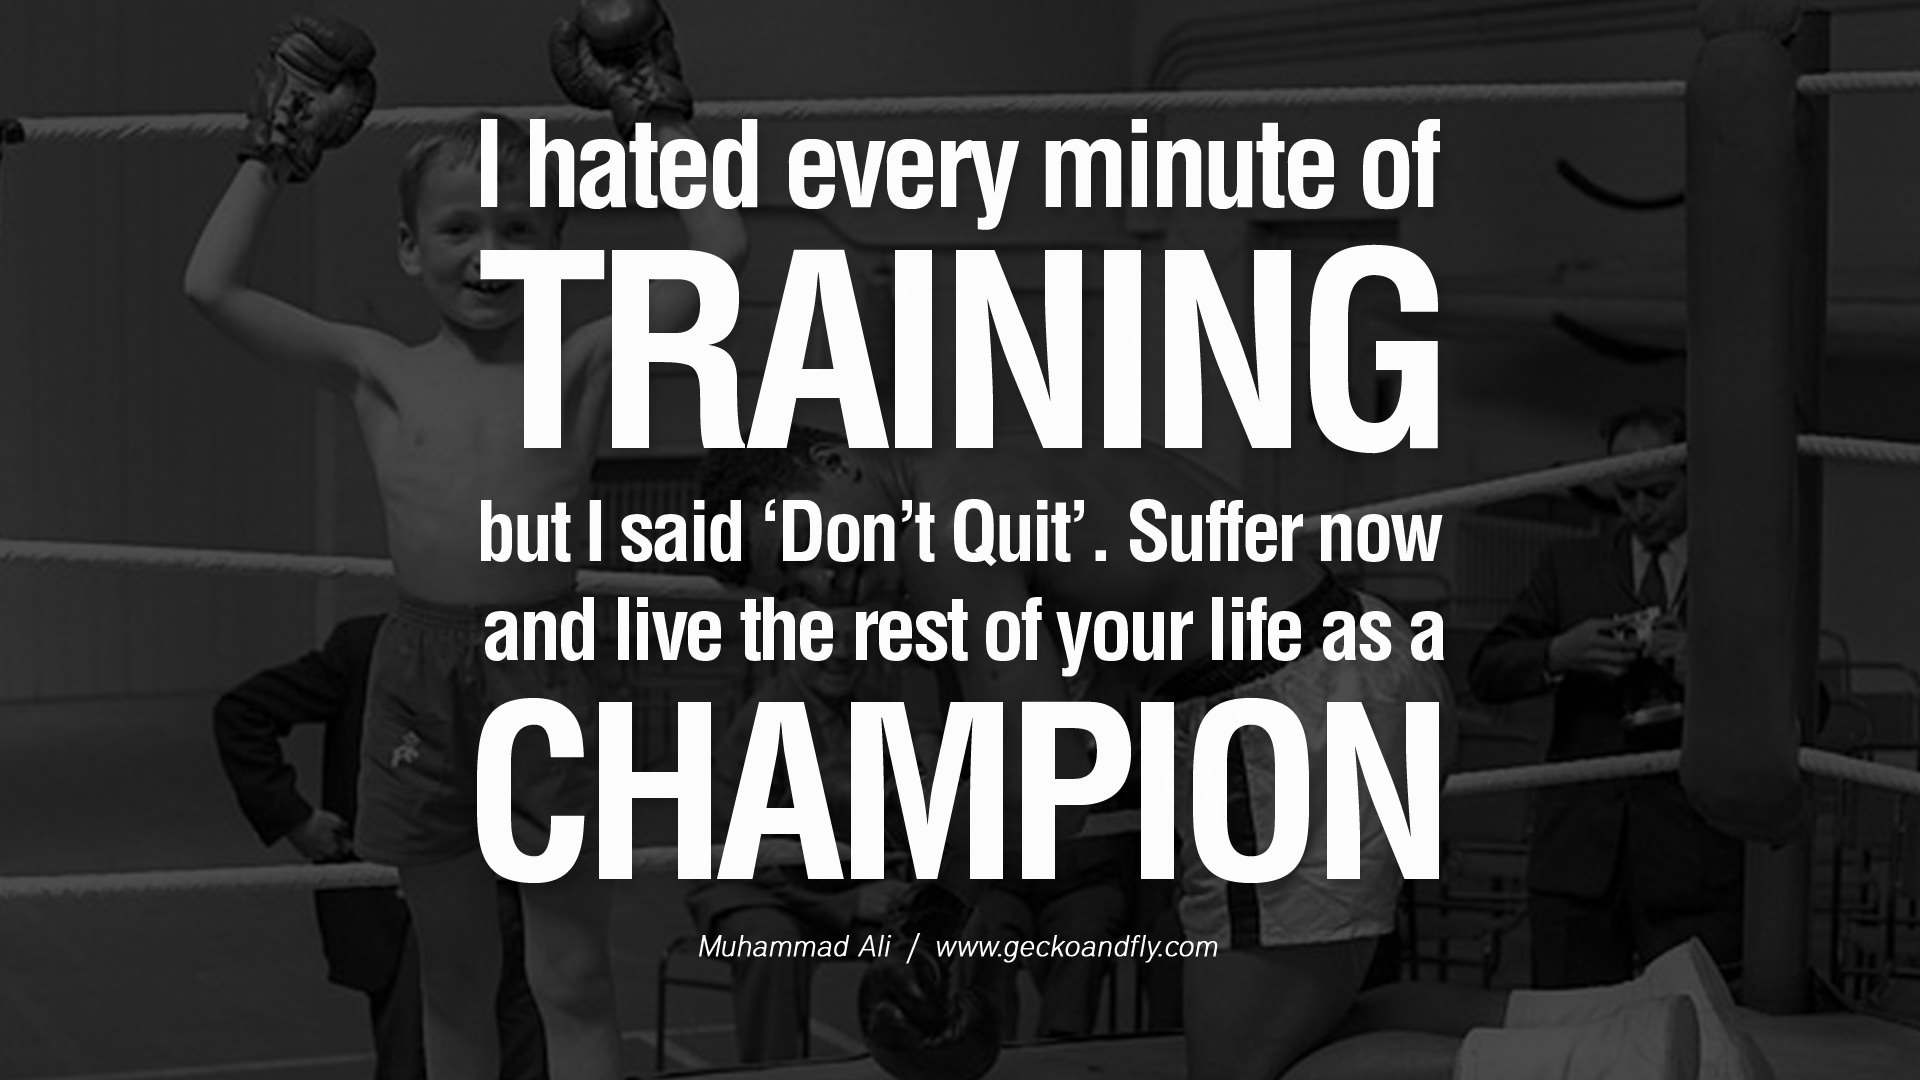 I hated every moment of training but i said dont quit suffer now and live the rest of your life as a champion muhammad ali quote